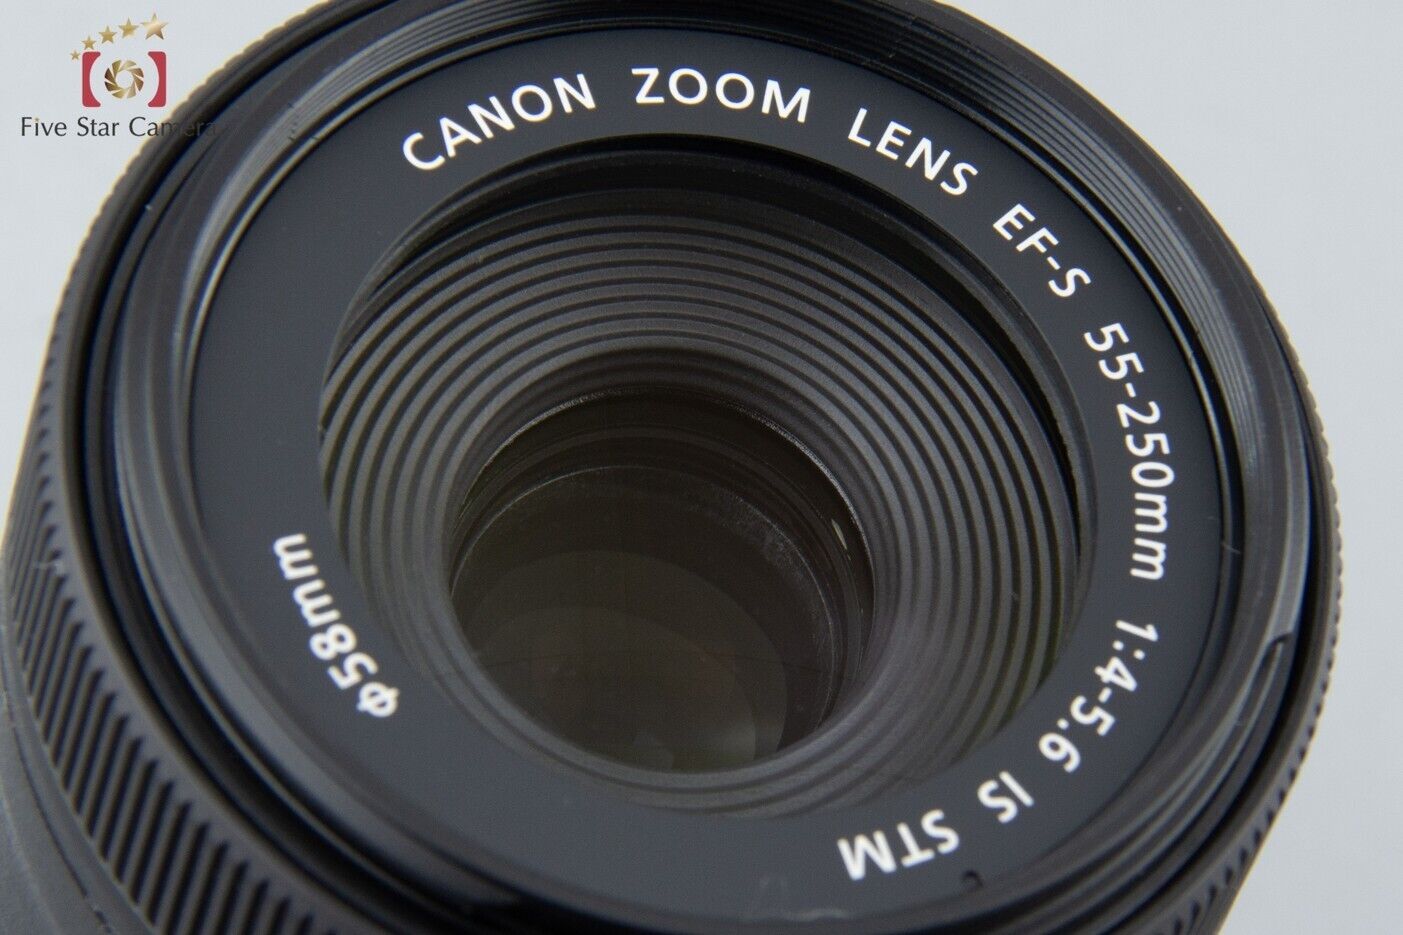 Mint!! Canon EF-S 55-250mm f/4-5.6 IS STM